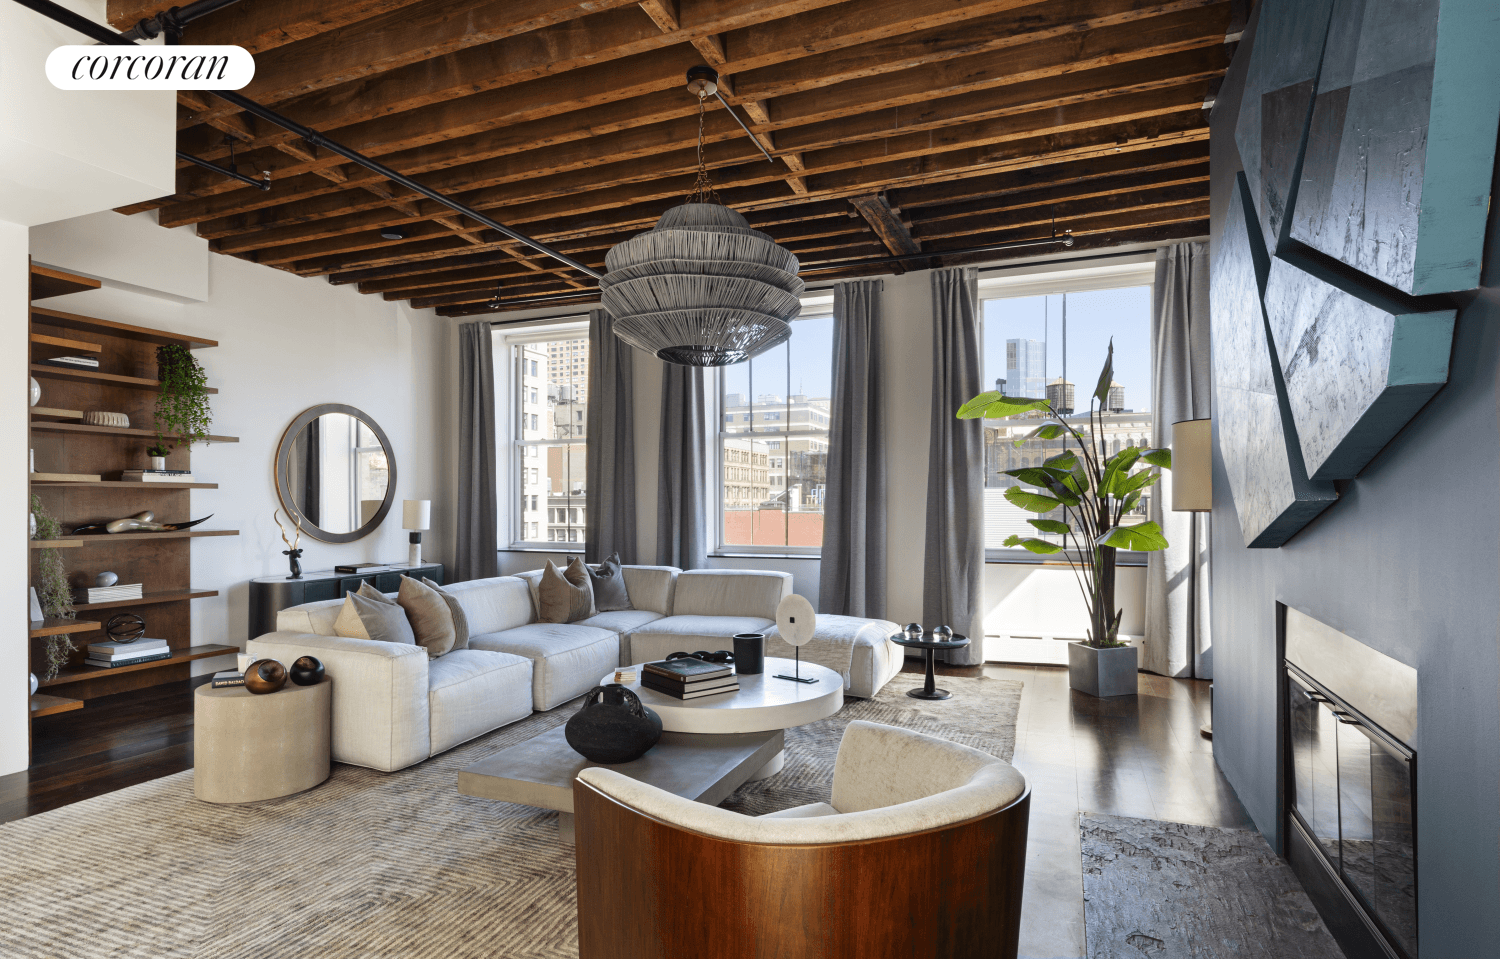 Introducing an Exceptionally Stylish Penthouse on the Desirable Great Jones Street.